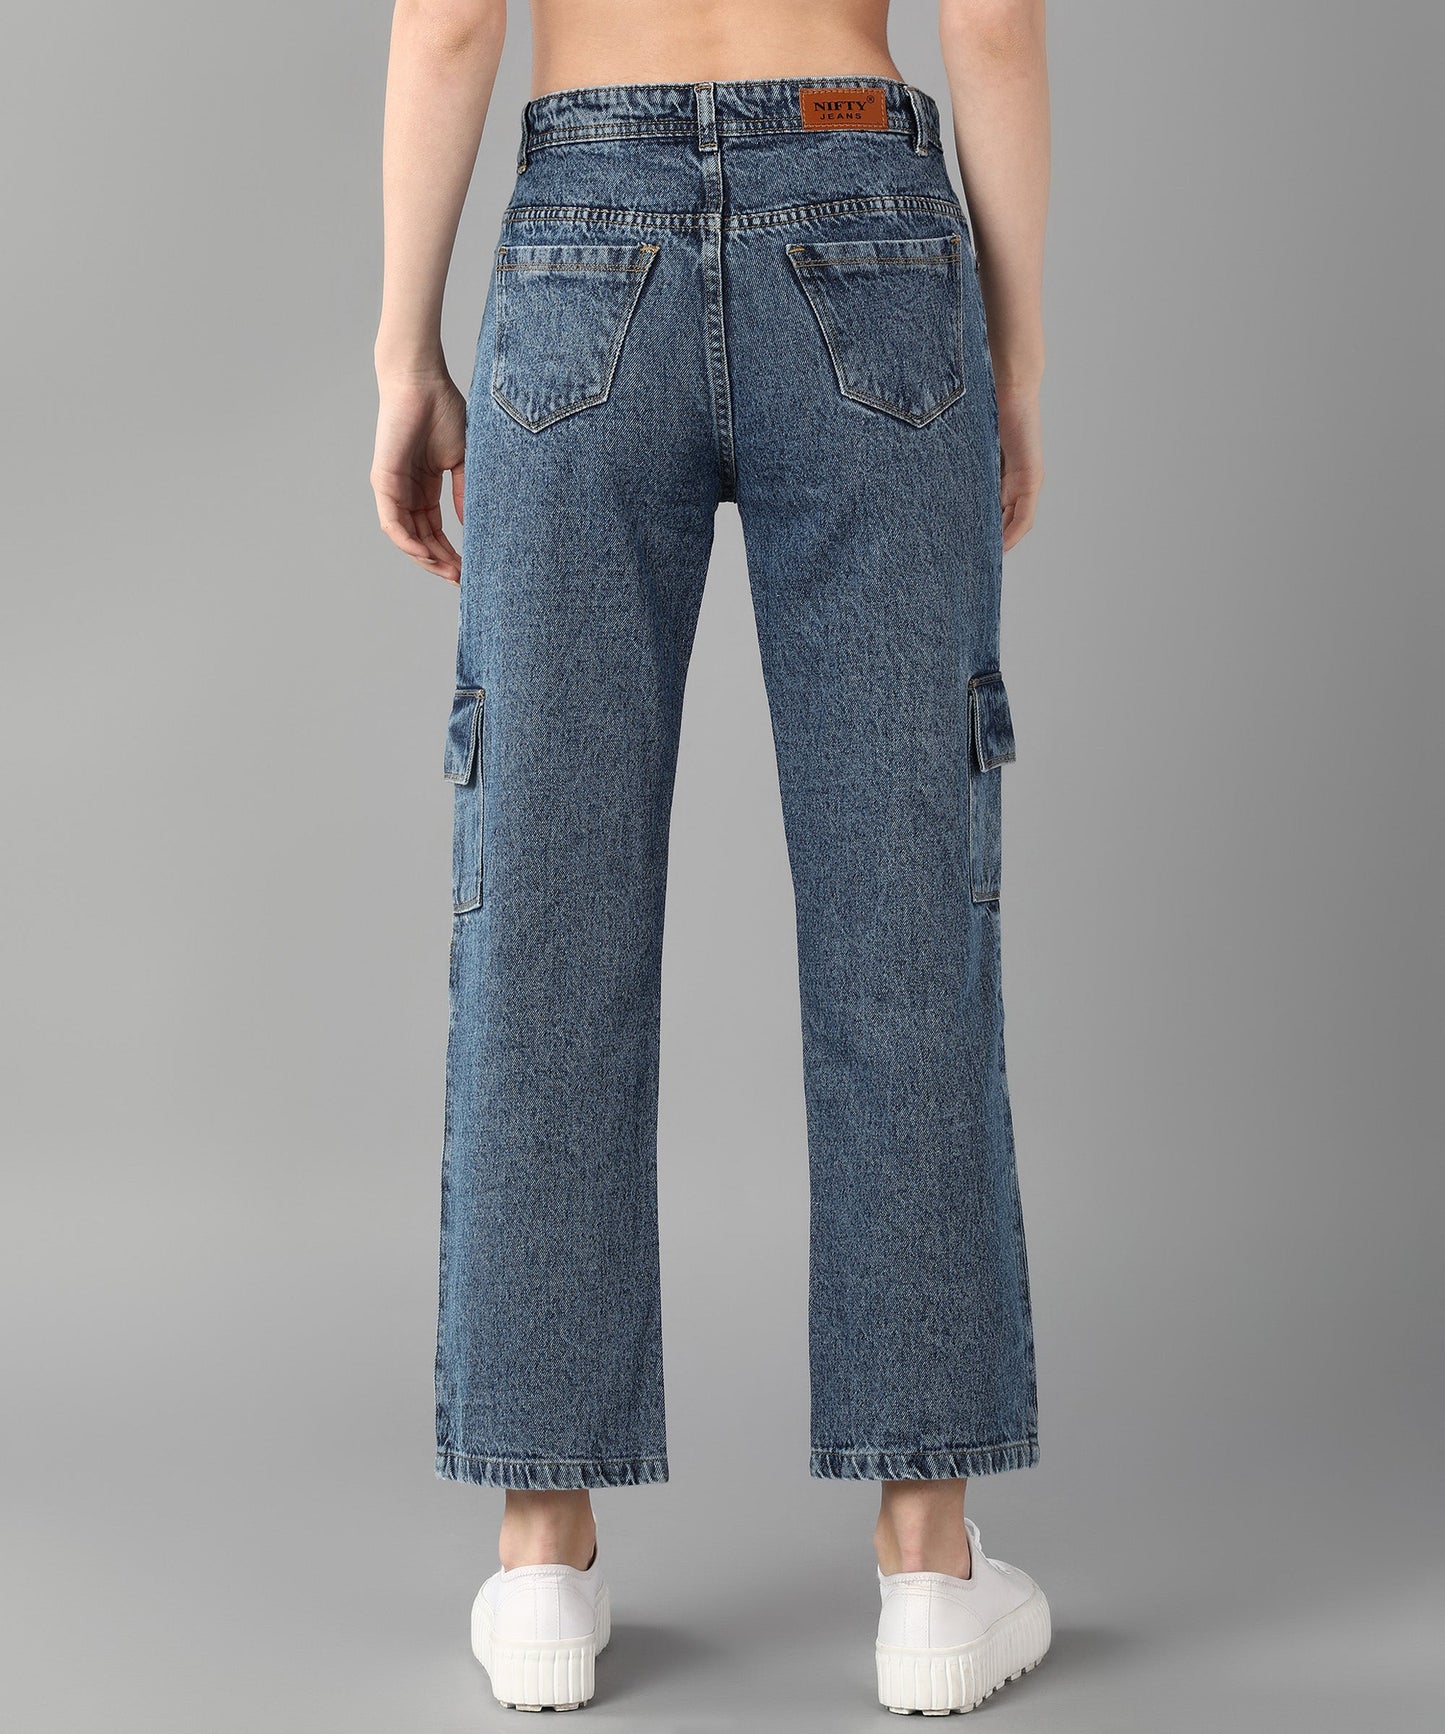 Relaxed Fit Cargo Sky Blue Jeans - NiftyJeans